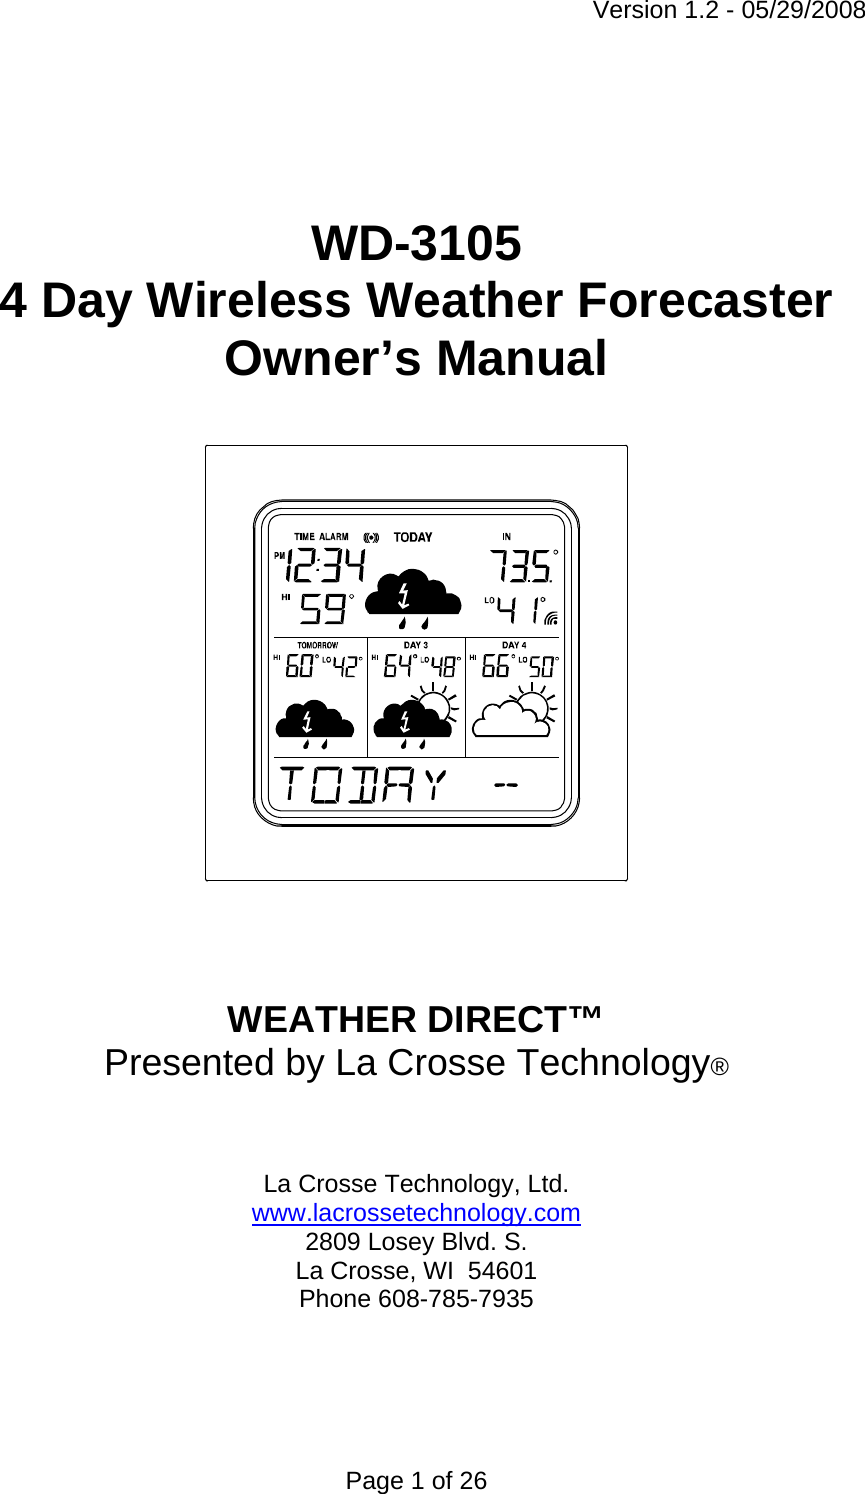 Version 1.2 - 05/29/2008 Page 1 of 26      WD-3105  4 Day Wireless Weather Forecaster Owner’s Manual     WEATHER DIRECT™ Presented by La Crosse Technology®     La Crosse Technology, Ltd. www.lacrossetechnology.com 2809 Losey Blvd. S. La Crosse, WI  54601 Phone 608-785-7935 